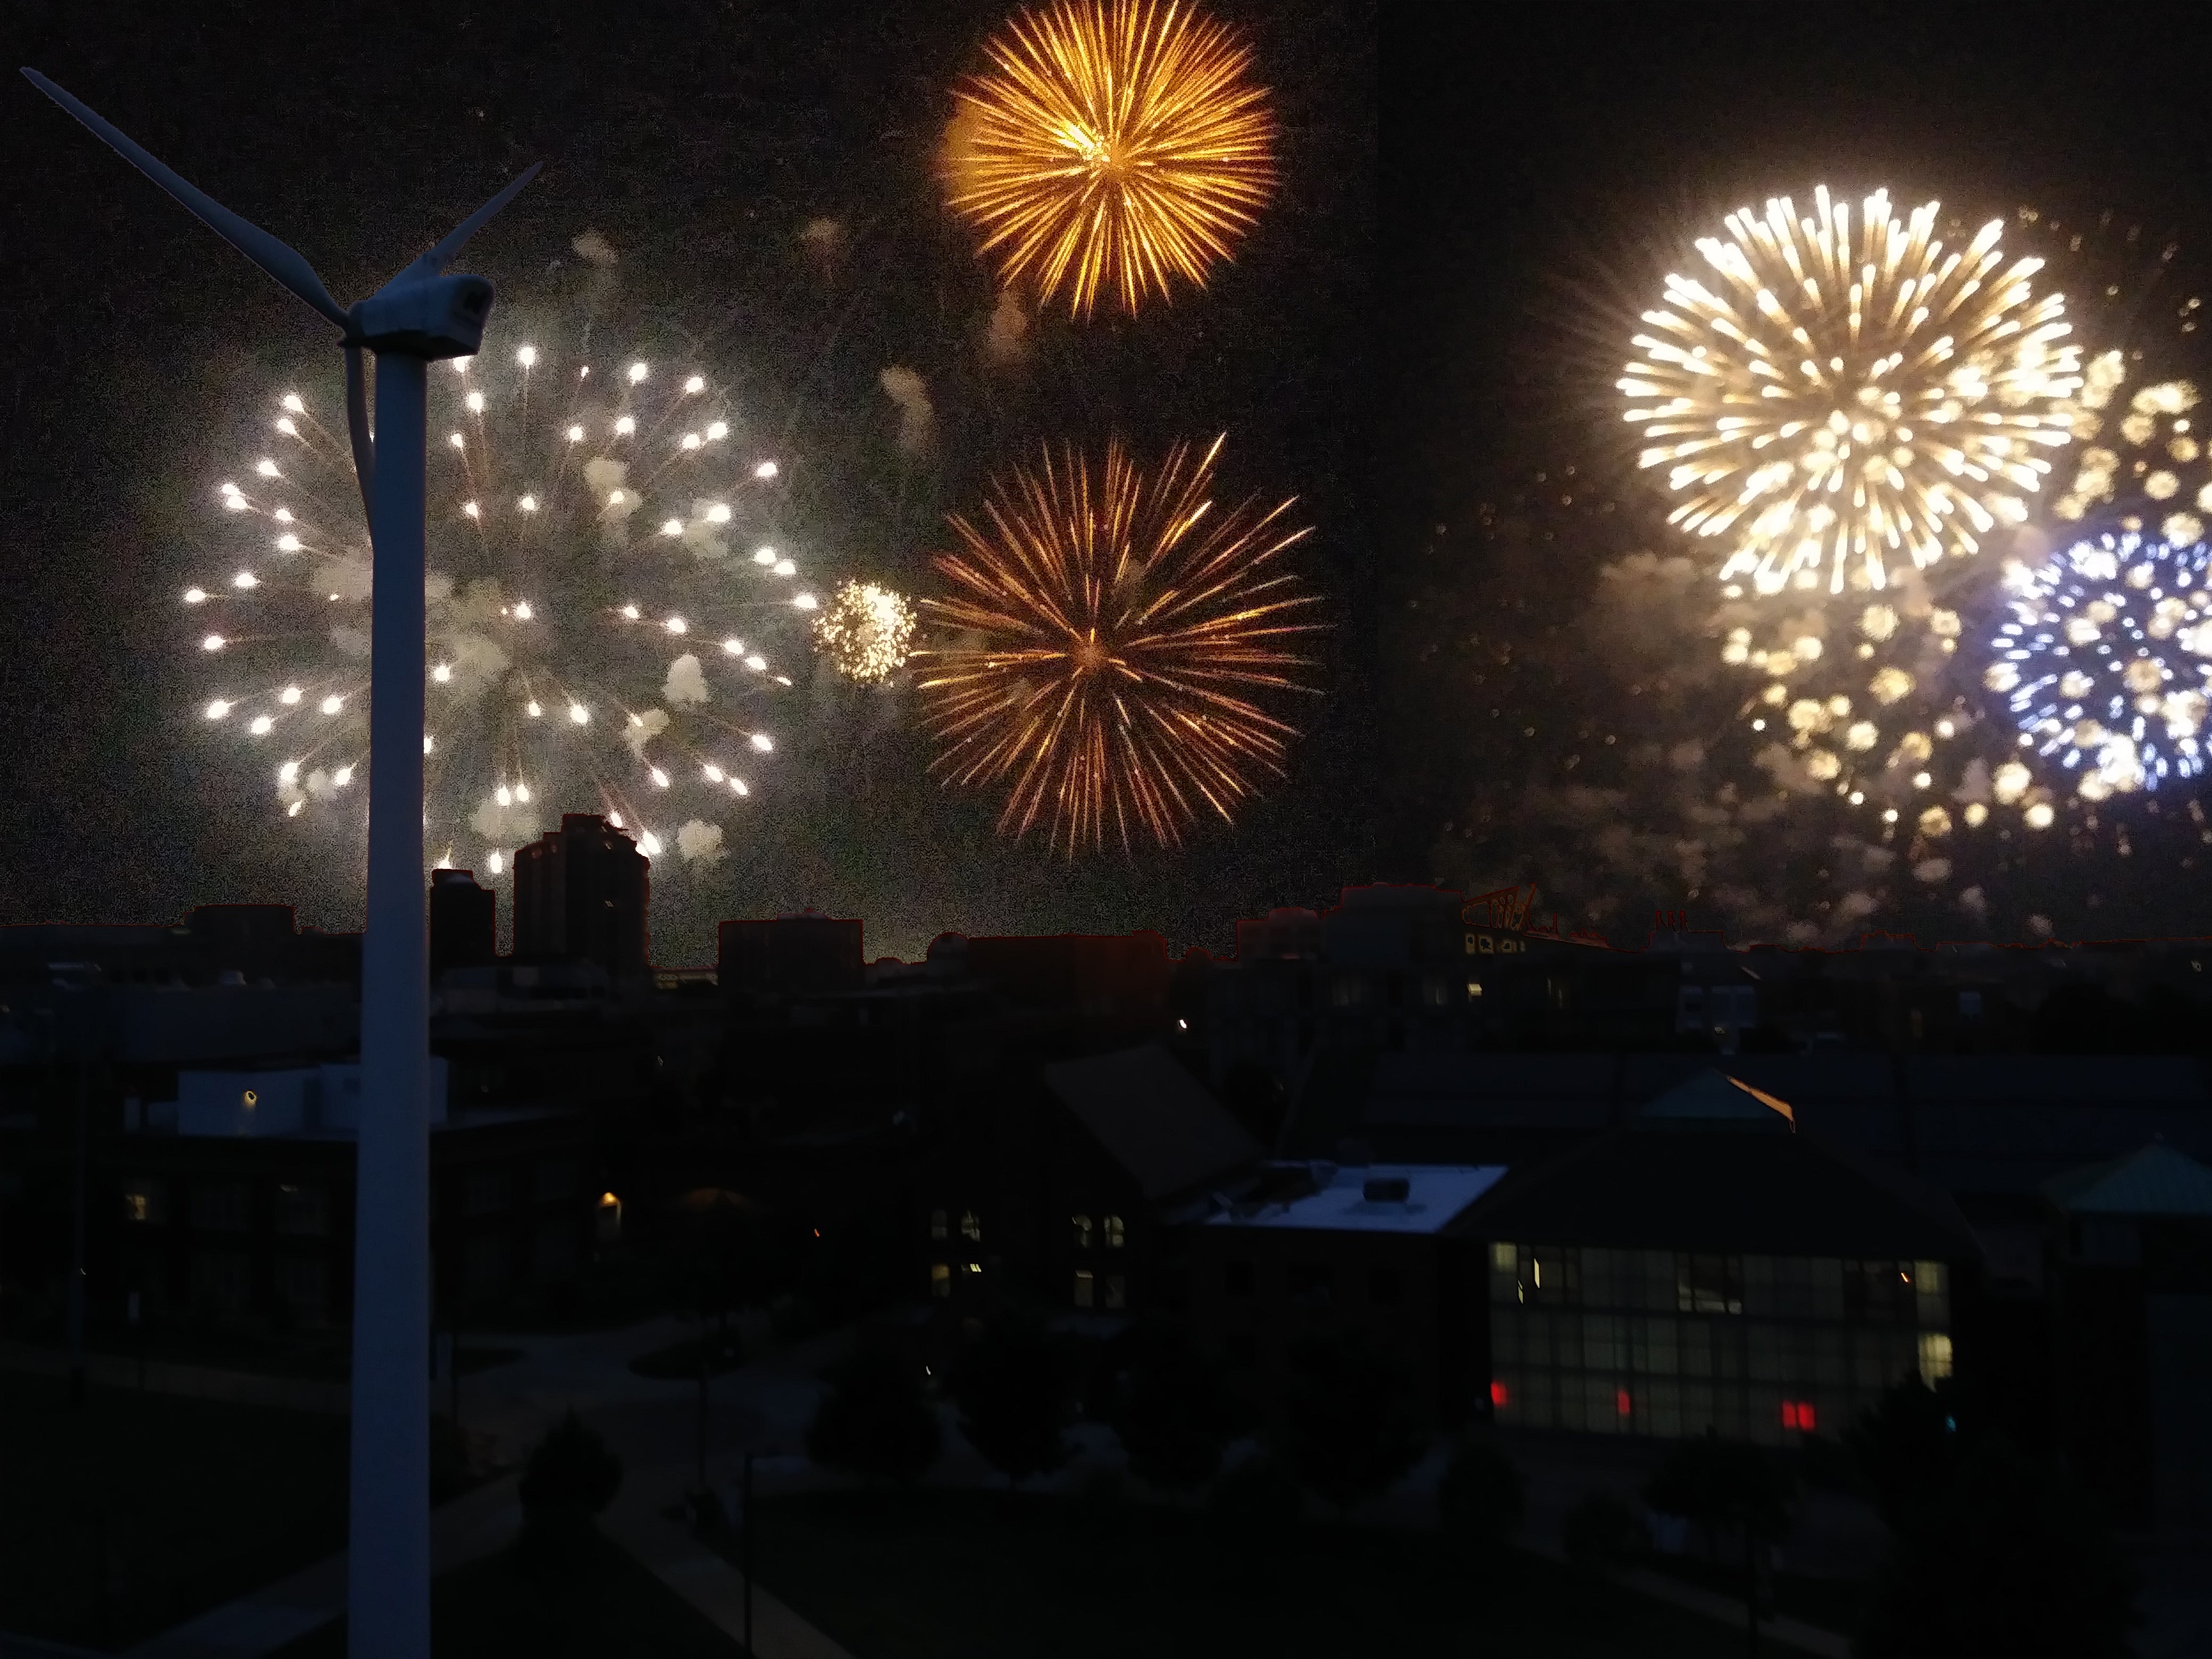 Photoshop of Fireworks Over the Main Quad July 2019